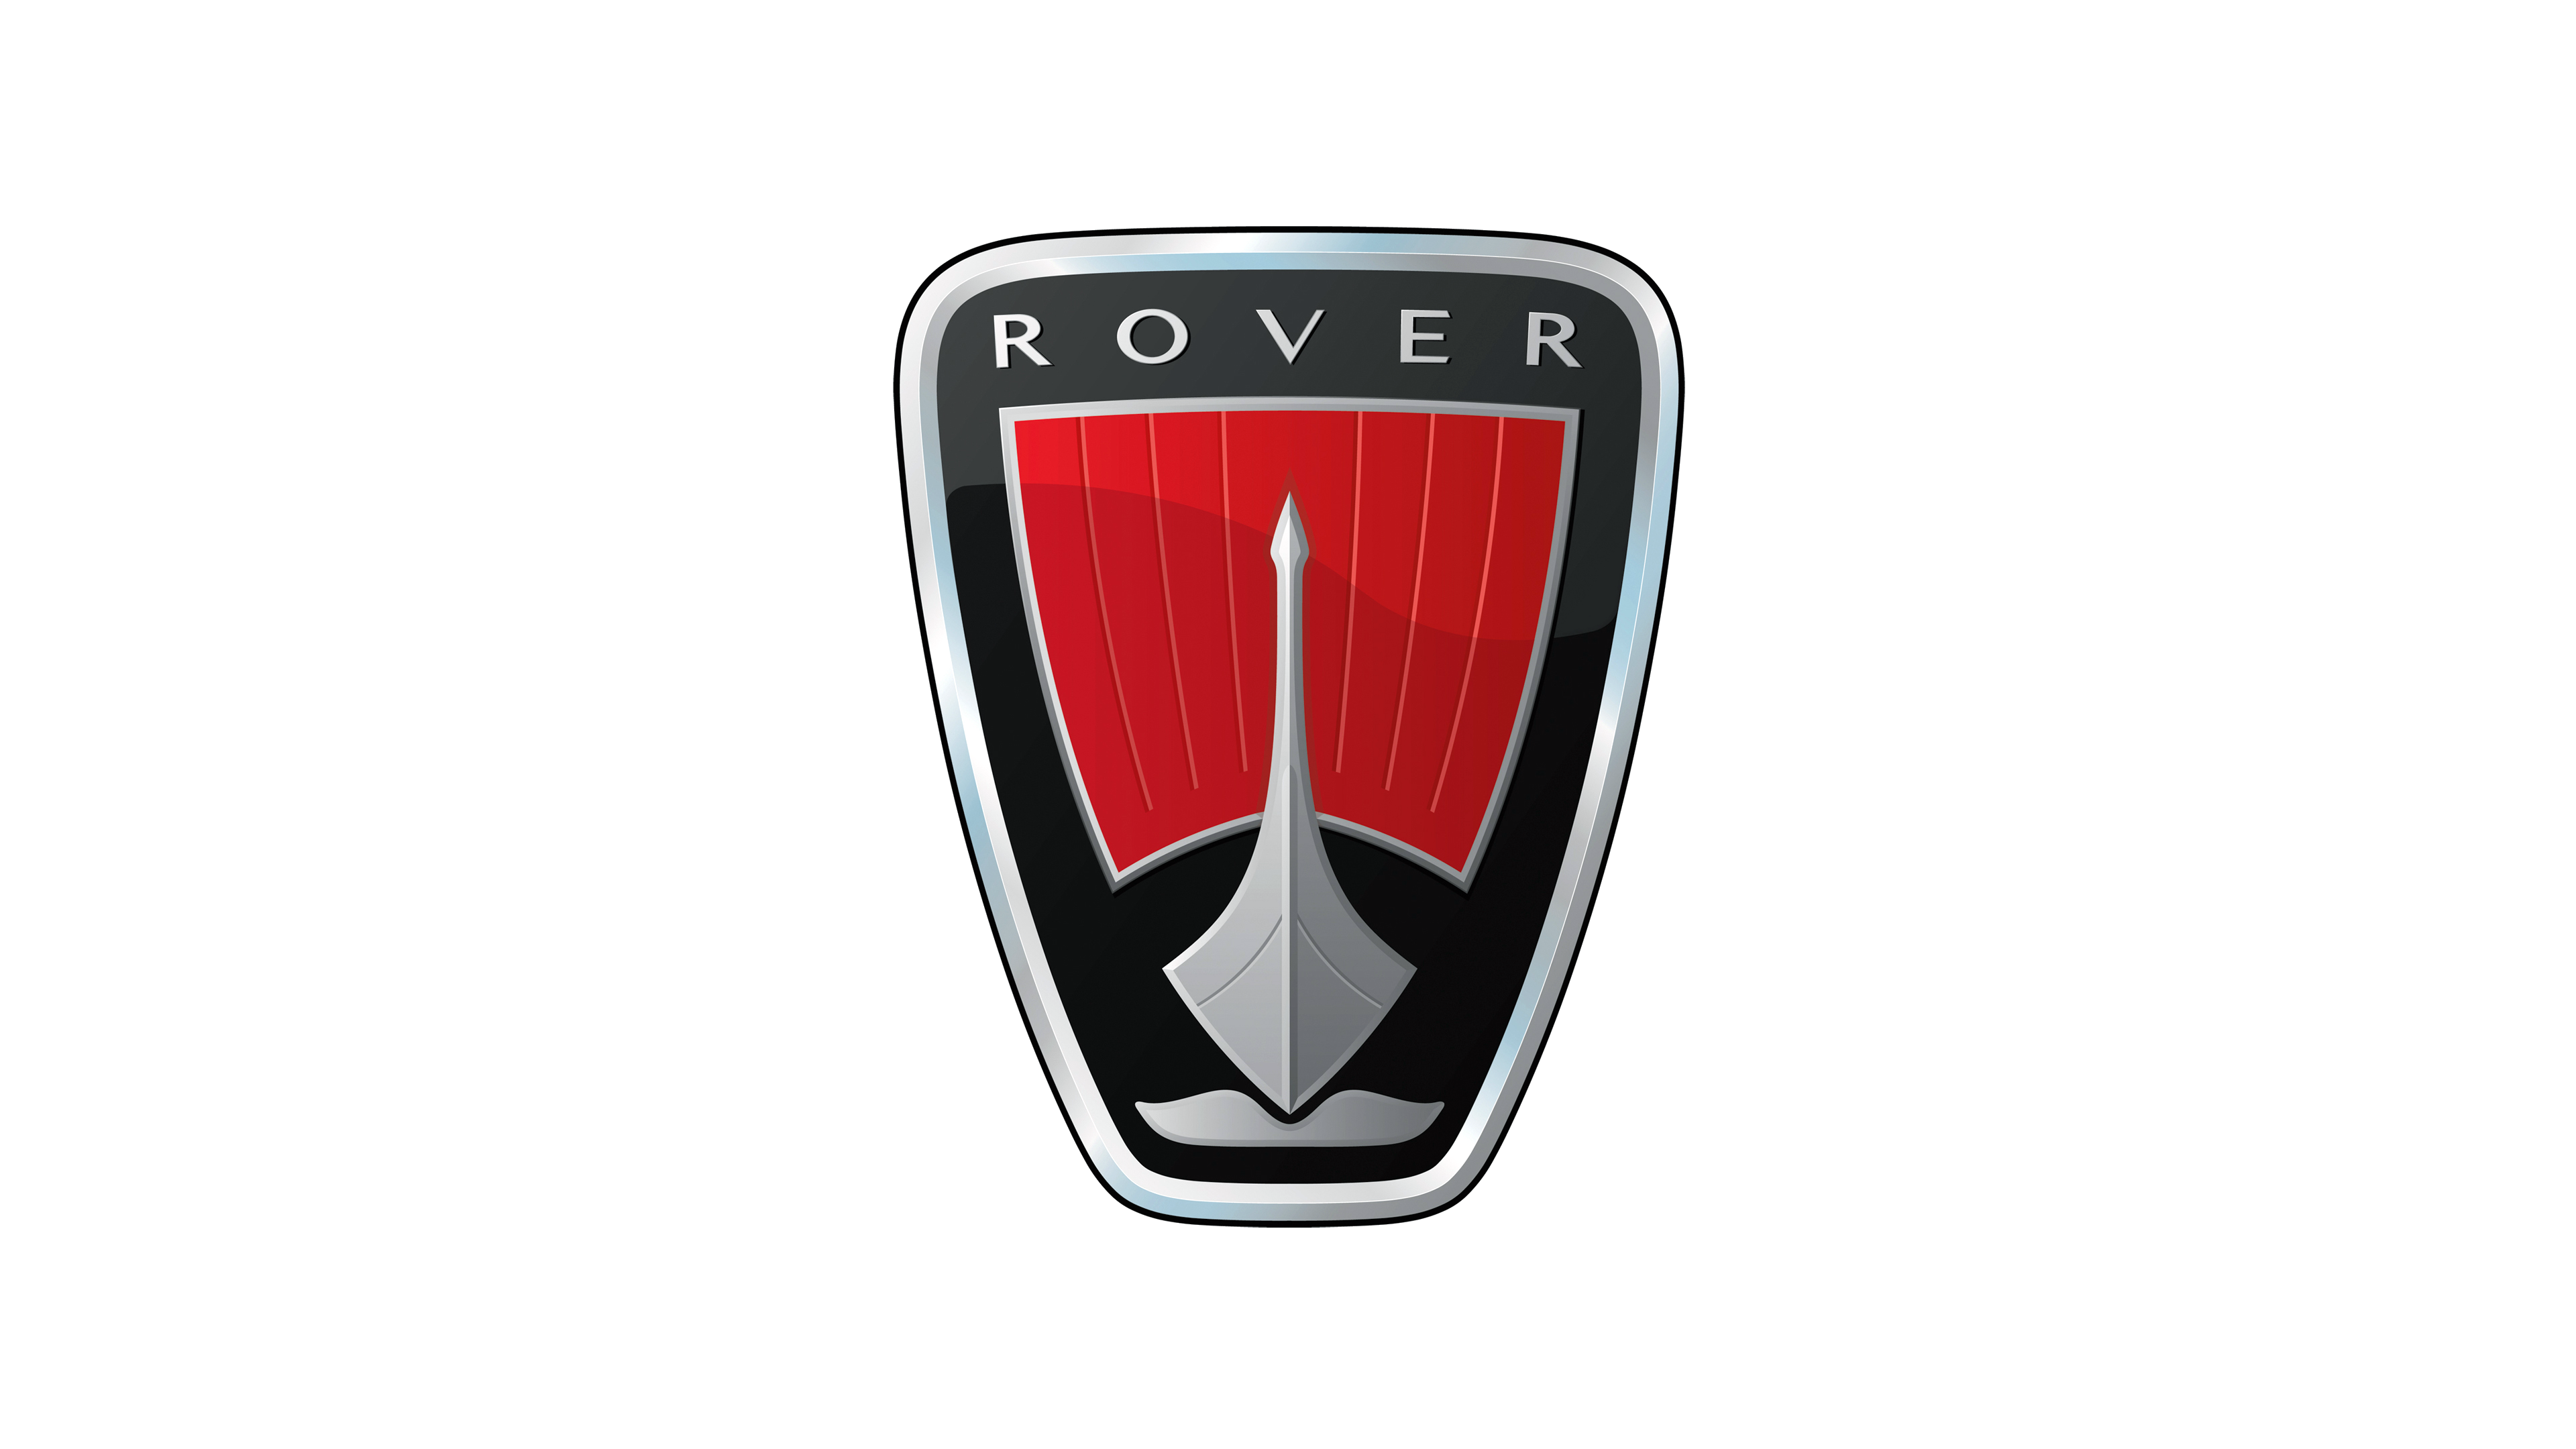 Rover Logo, HD Png, Meaning, Information | Carlogos.org